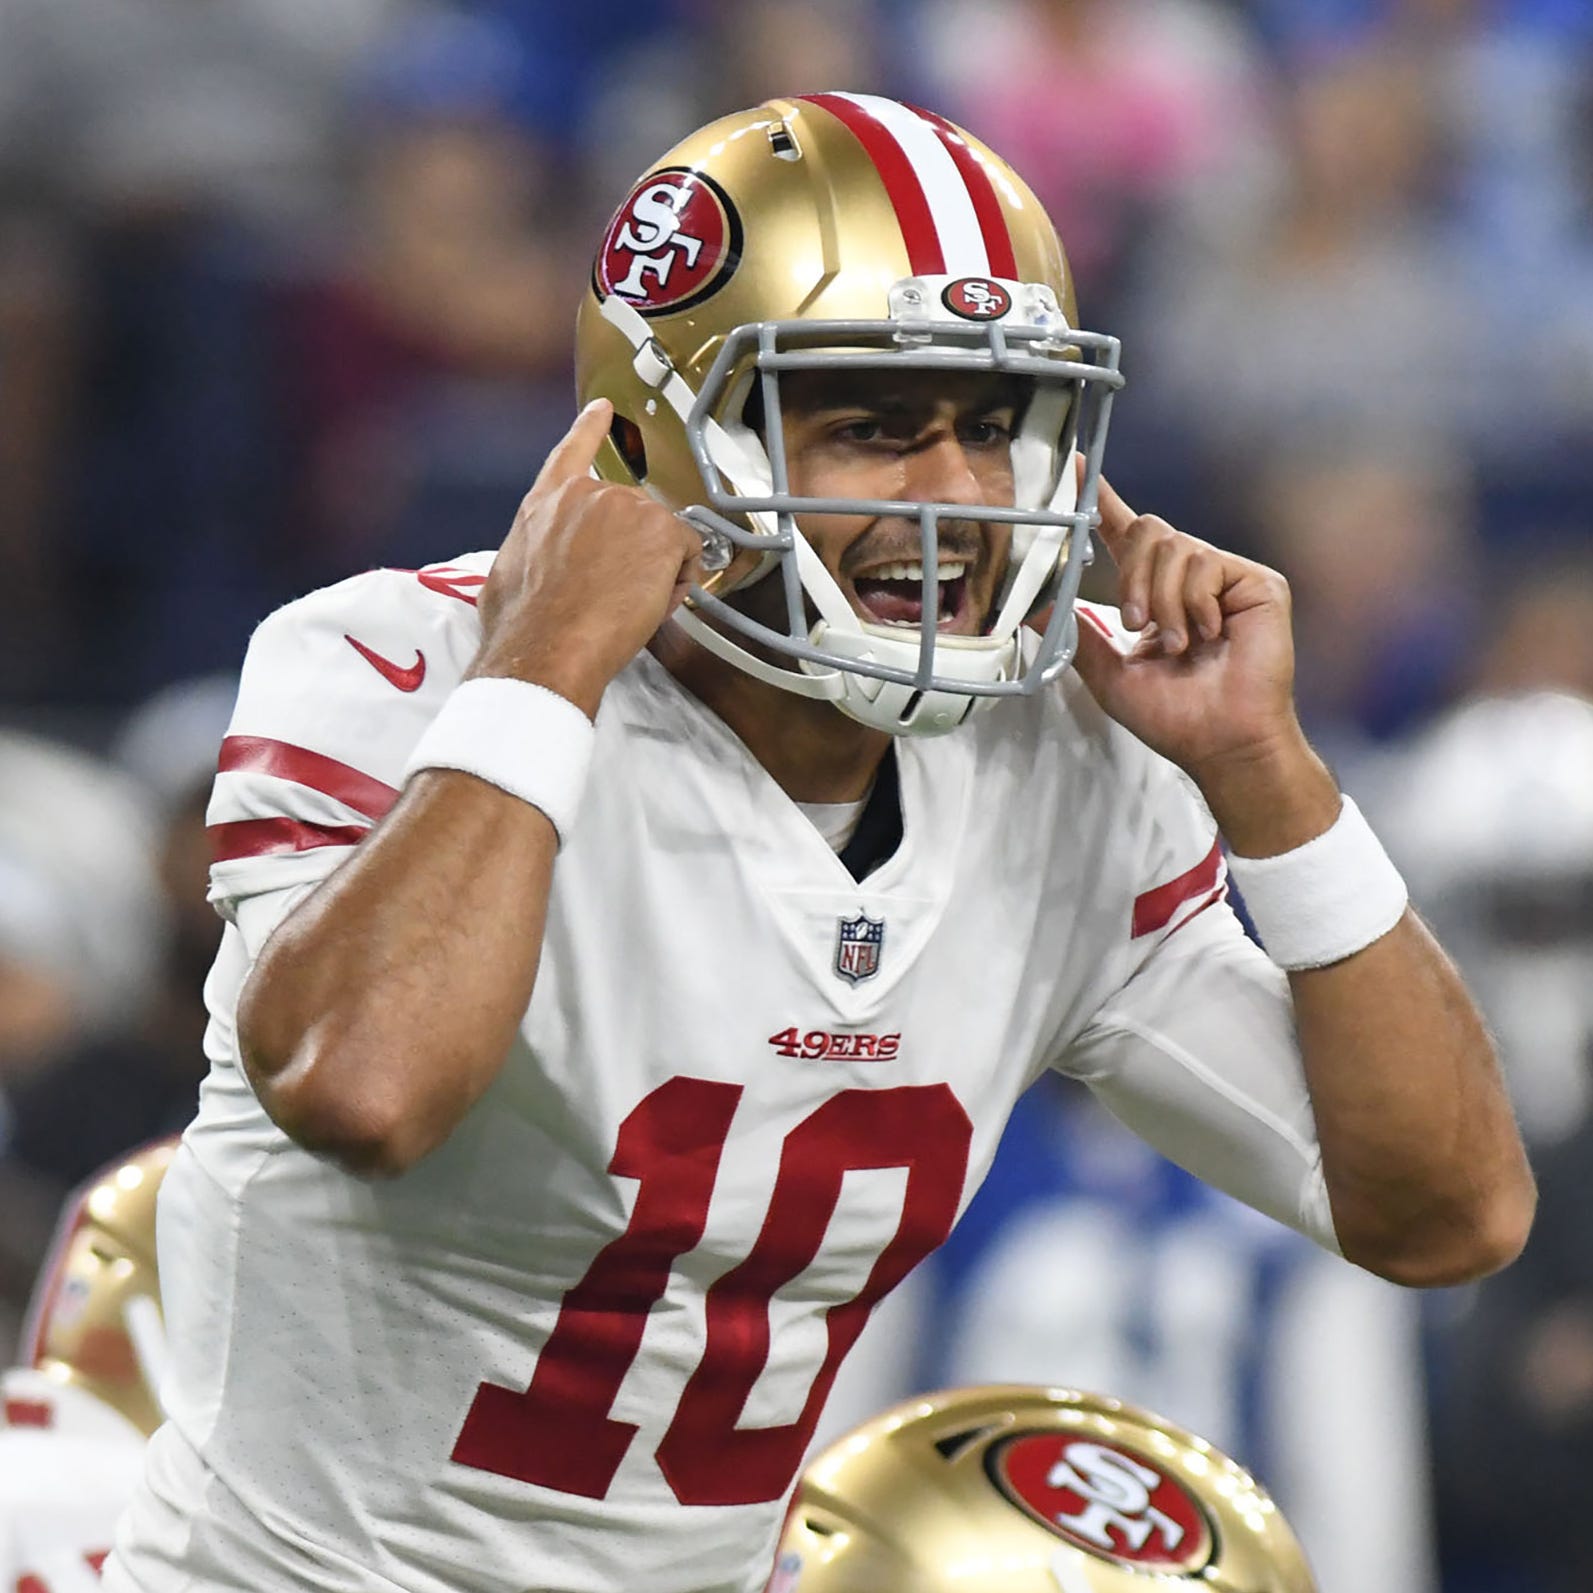 Luckily for the 49ers, QB Jimmy Garoppolo saves his best stuff for the games that count.